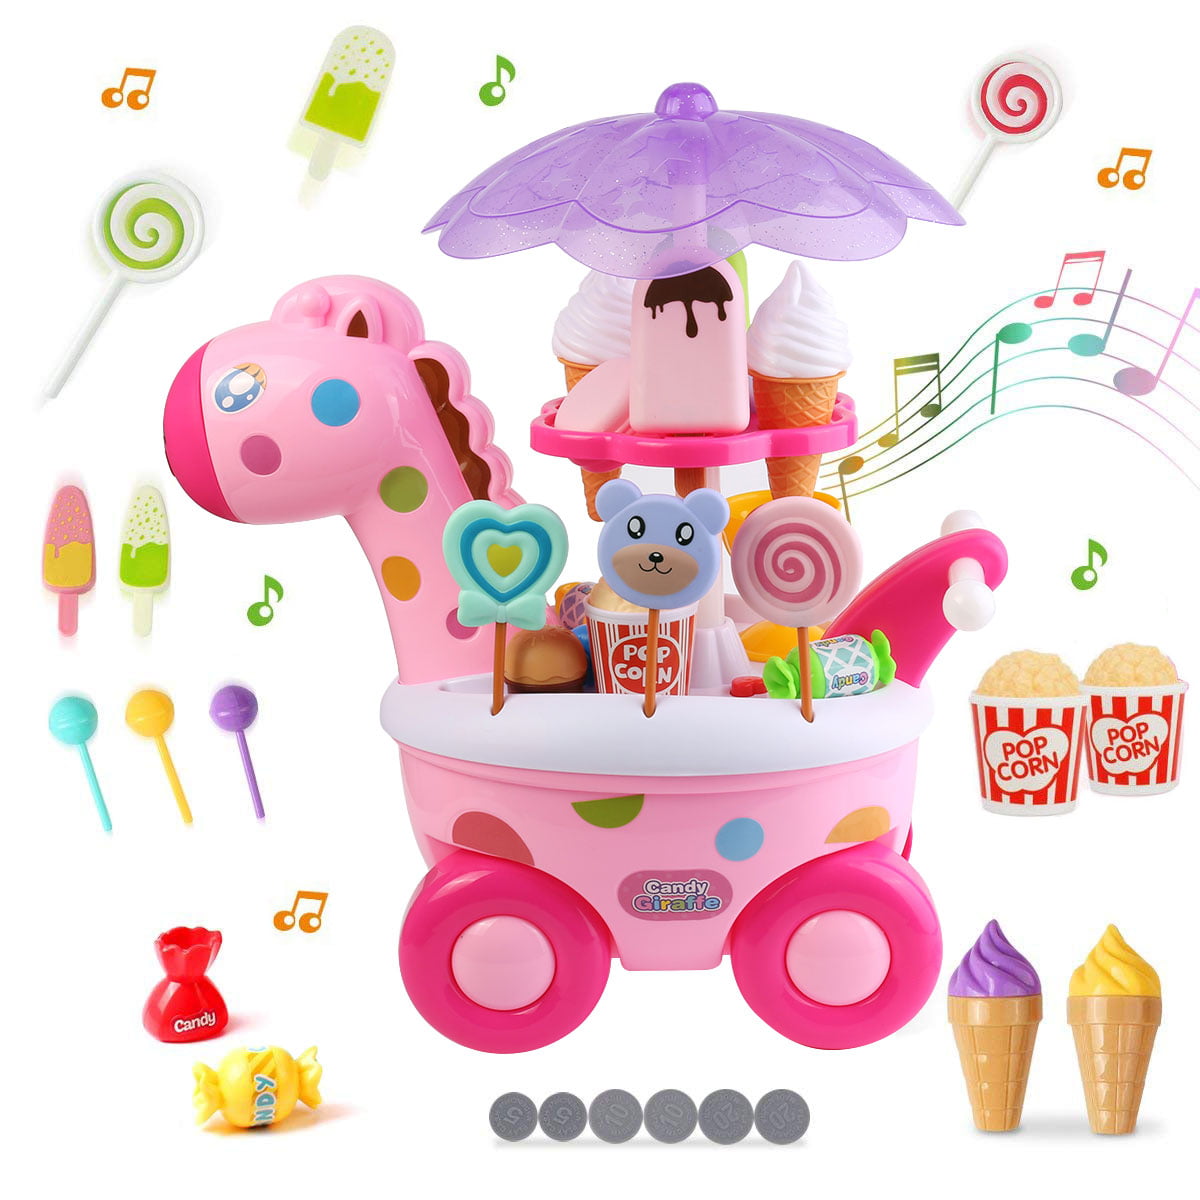 Portable Supermarker Sweets Ice Cream Playset for Kids Babies Toddlers Play Food 